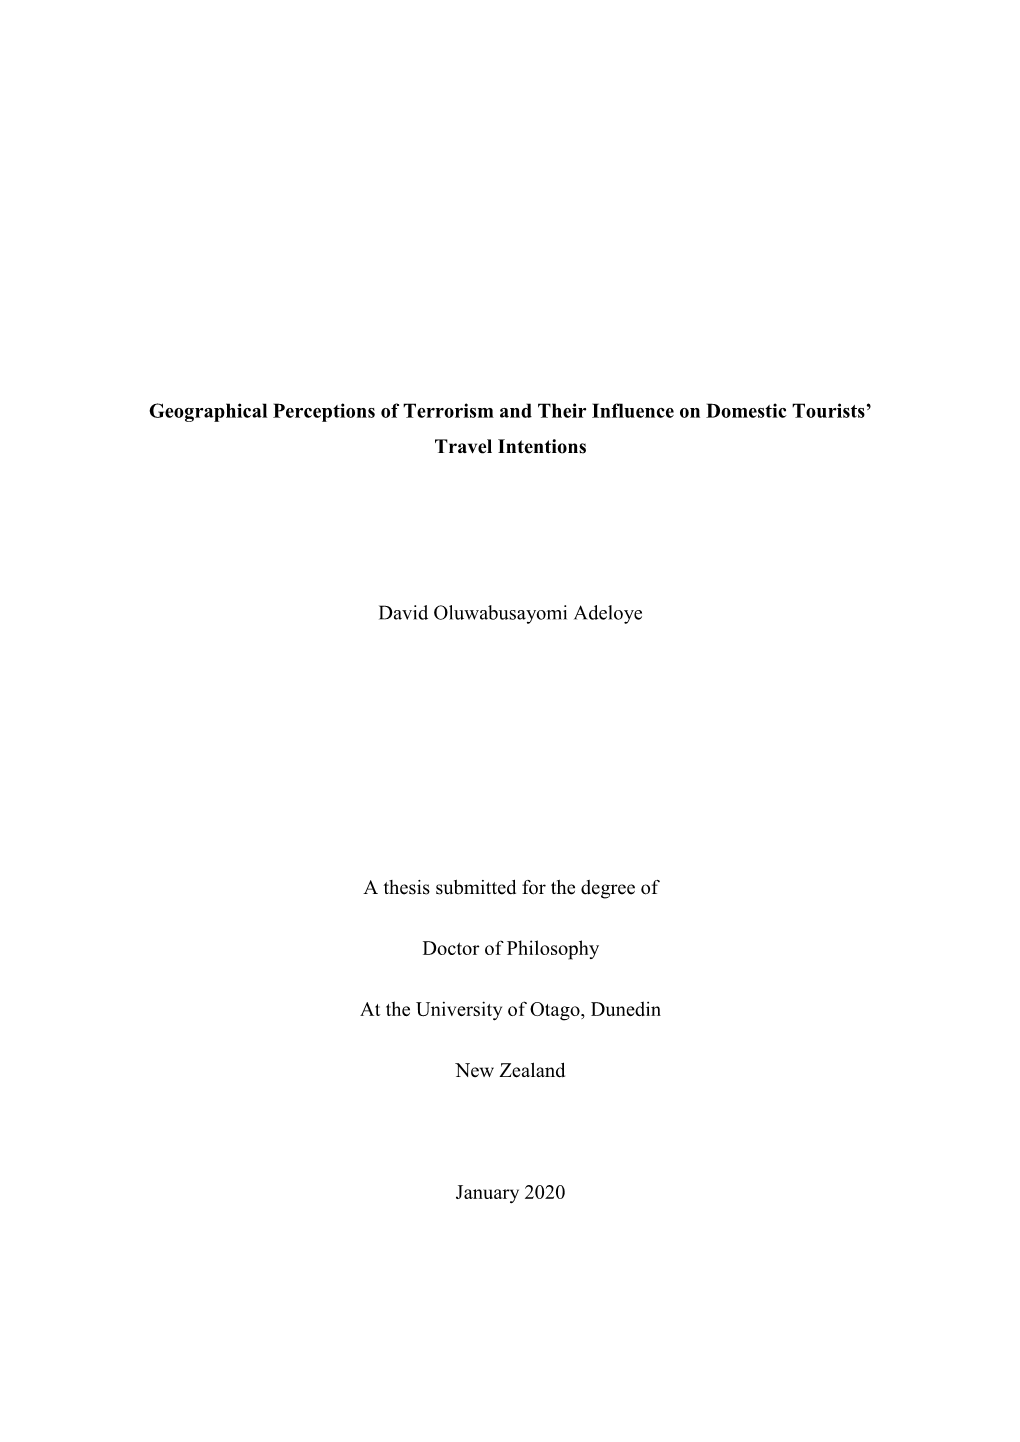 Geographical Perceptions of Terrorism and Their Influence on Domestic Tourists’ Travel Intentions